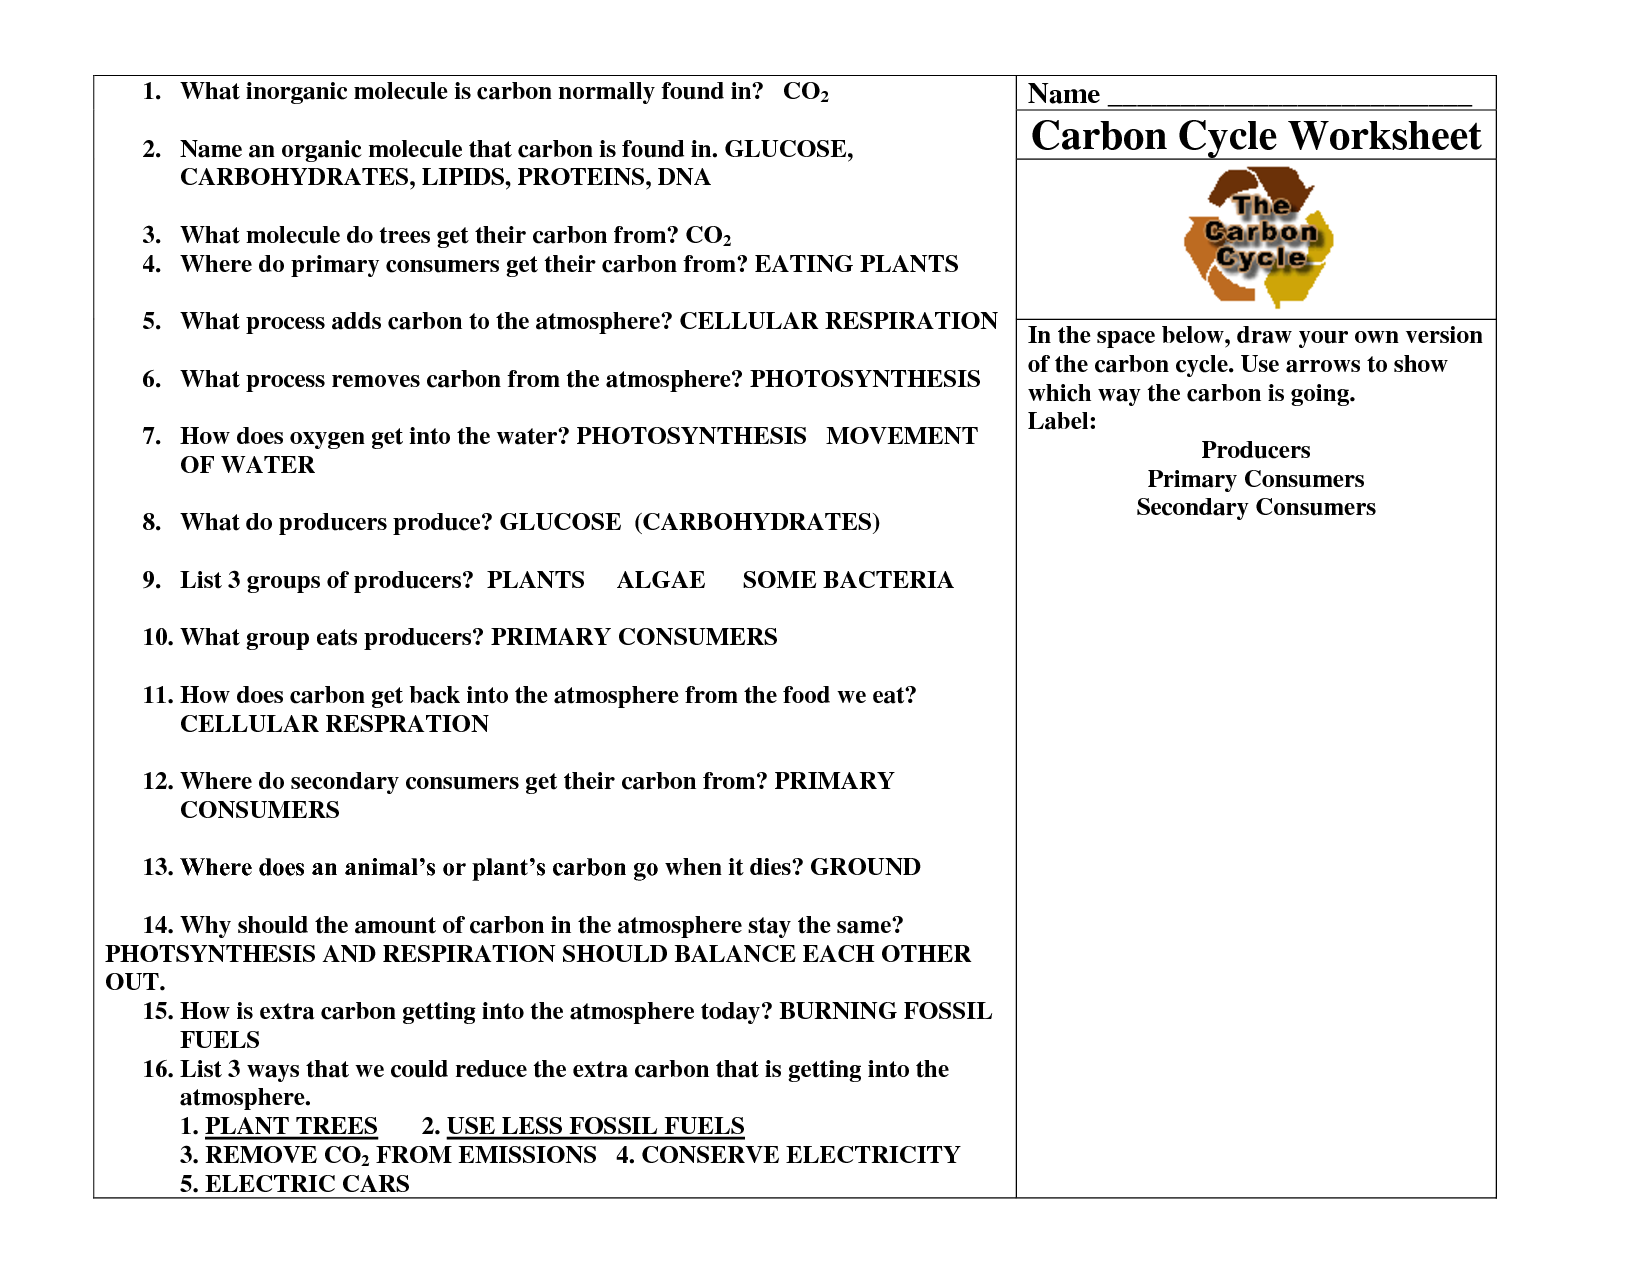 Carbon Cycle Worksheet Answers Image